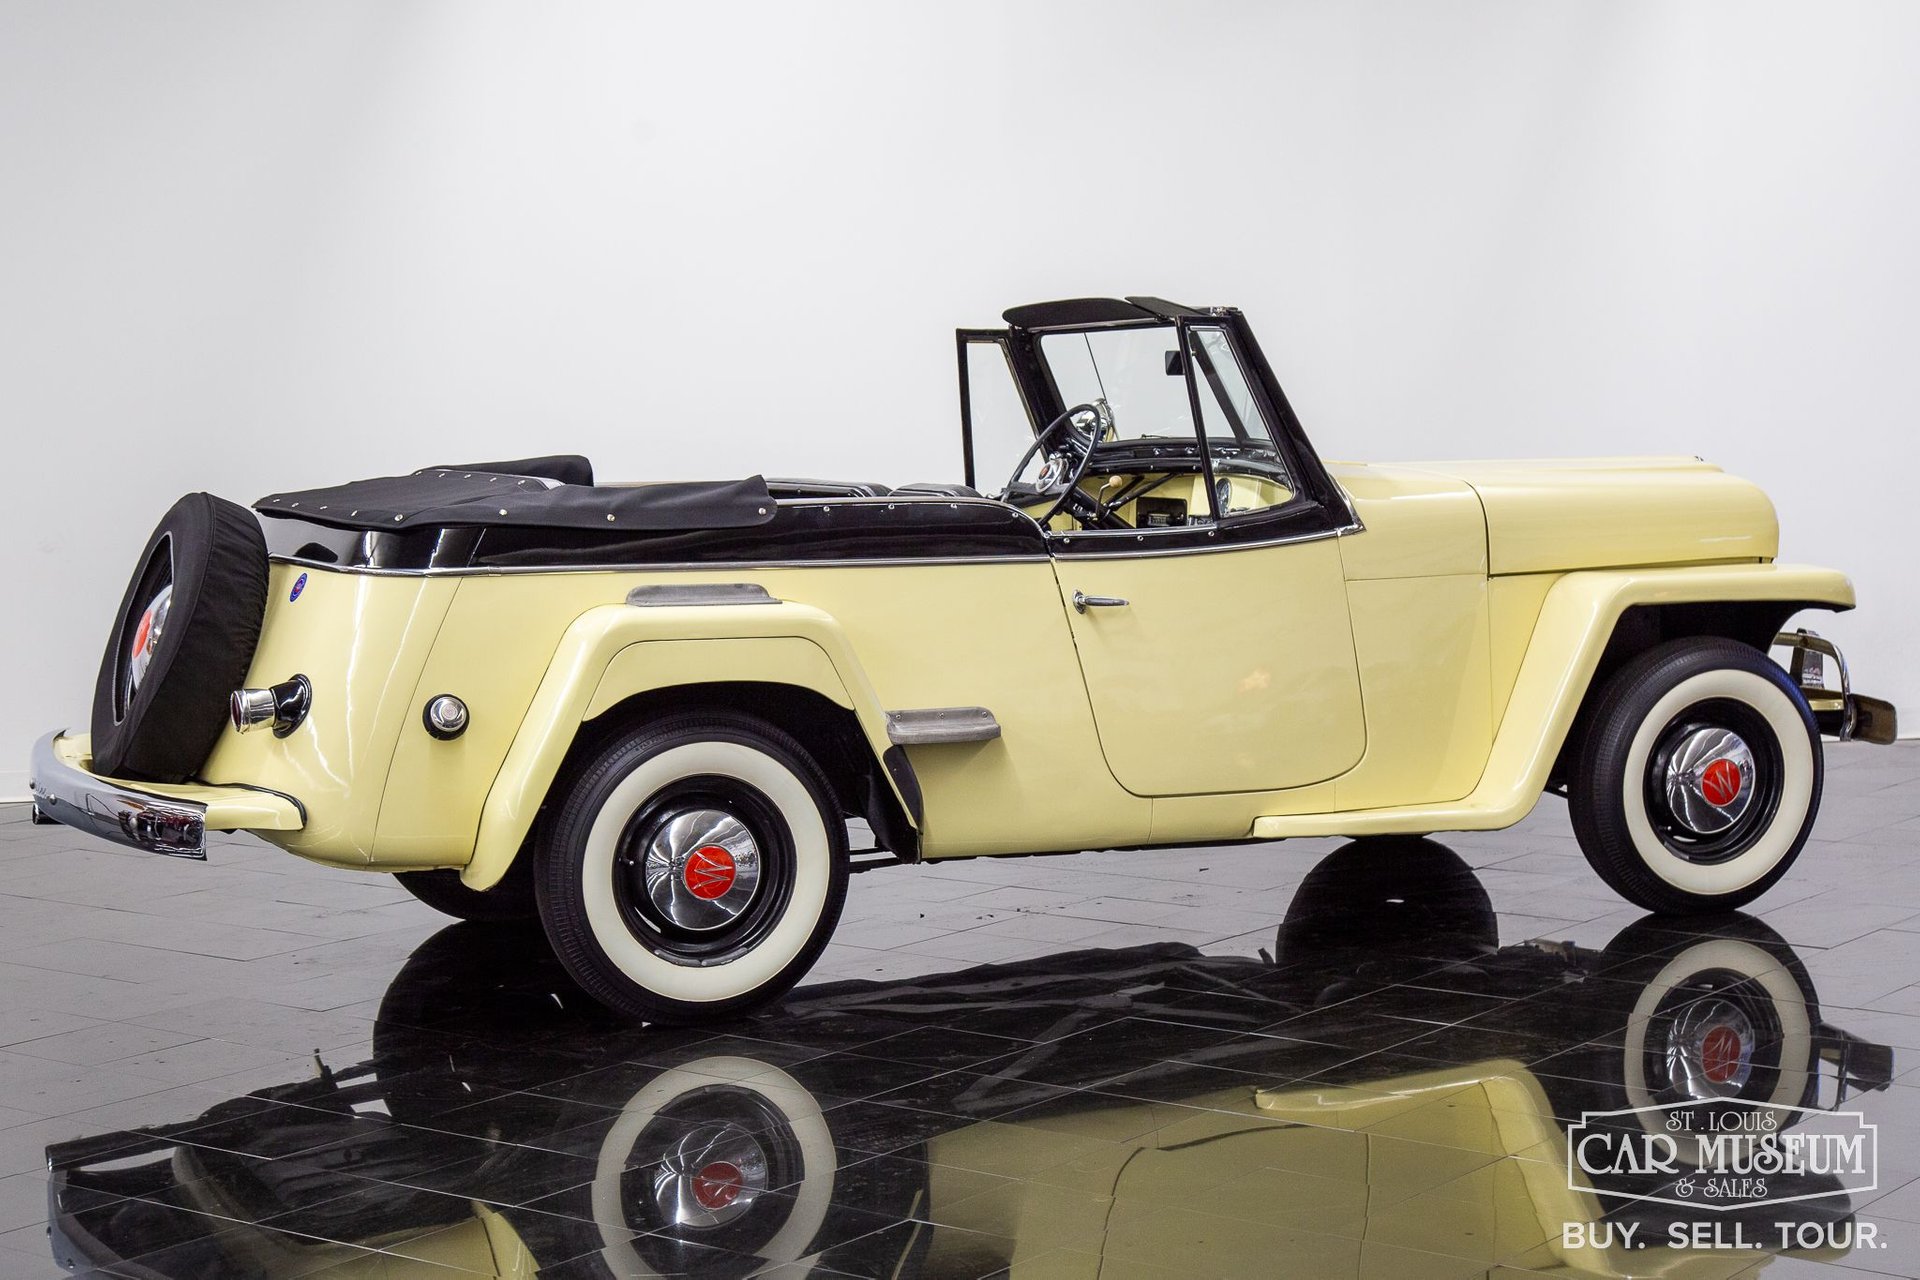 Factory Photo Ref. #50570 1950 Willys-Overland Jeepster Picture 